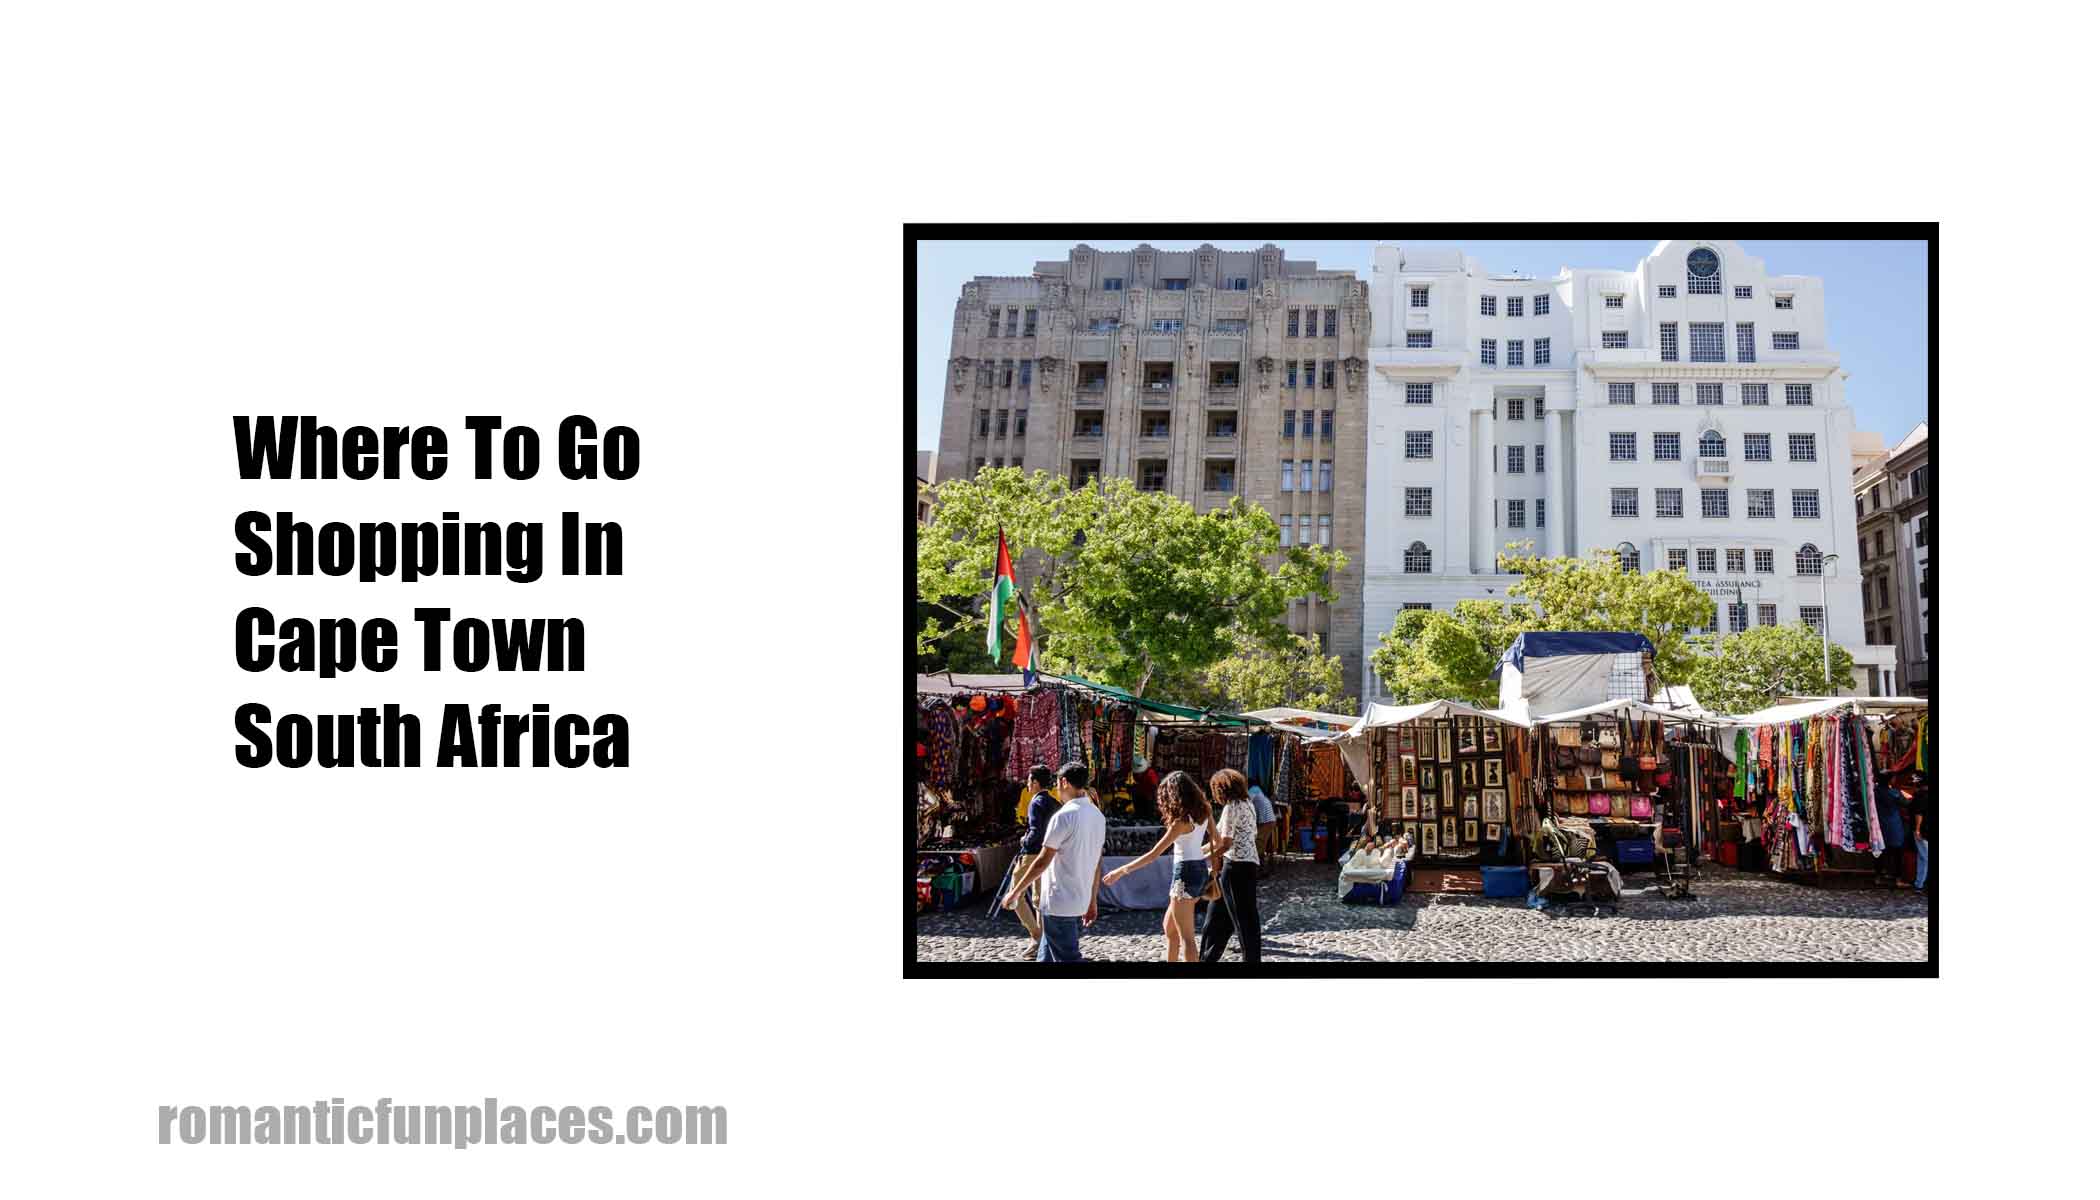 Where To Go Shopping In Cape Town South Africa